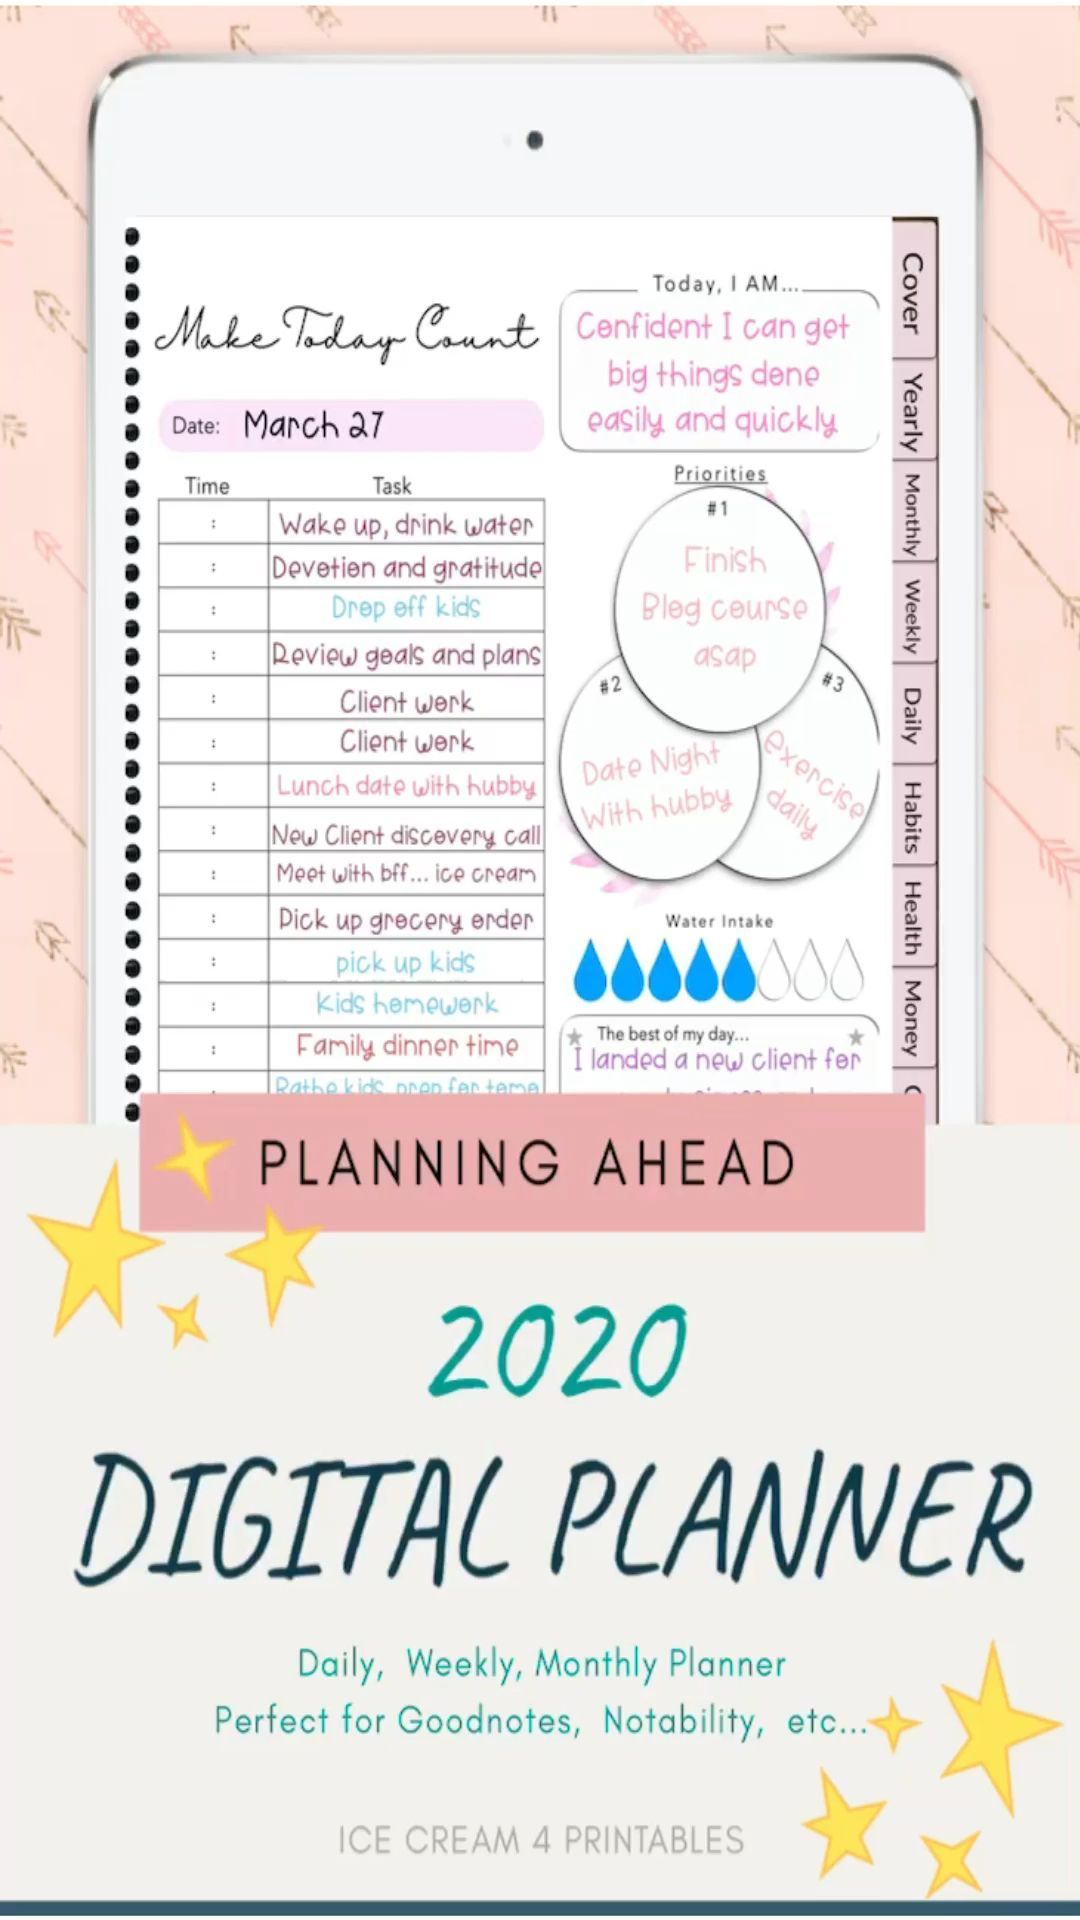 2020 Digital Planner Templates for Organizing Your Life | Marie McGee - 2020 Digital Planner Templates for Organizing Your Life | Marie McGee -   19 commit30 fitness Planner ideas